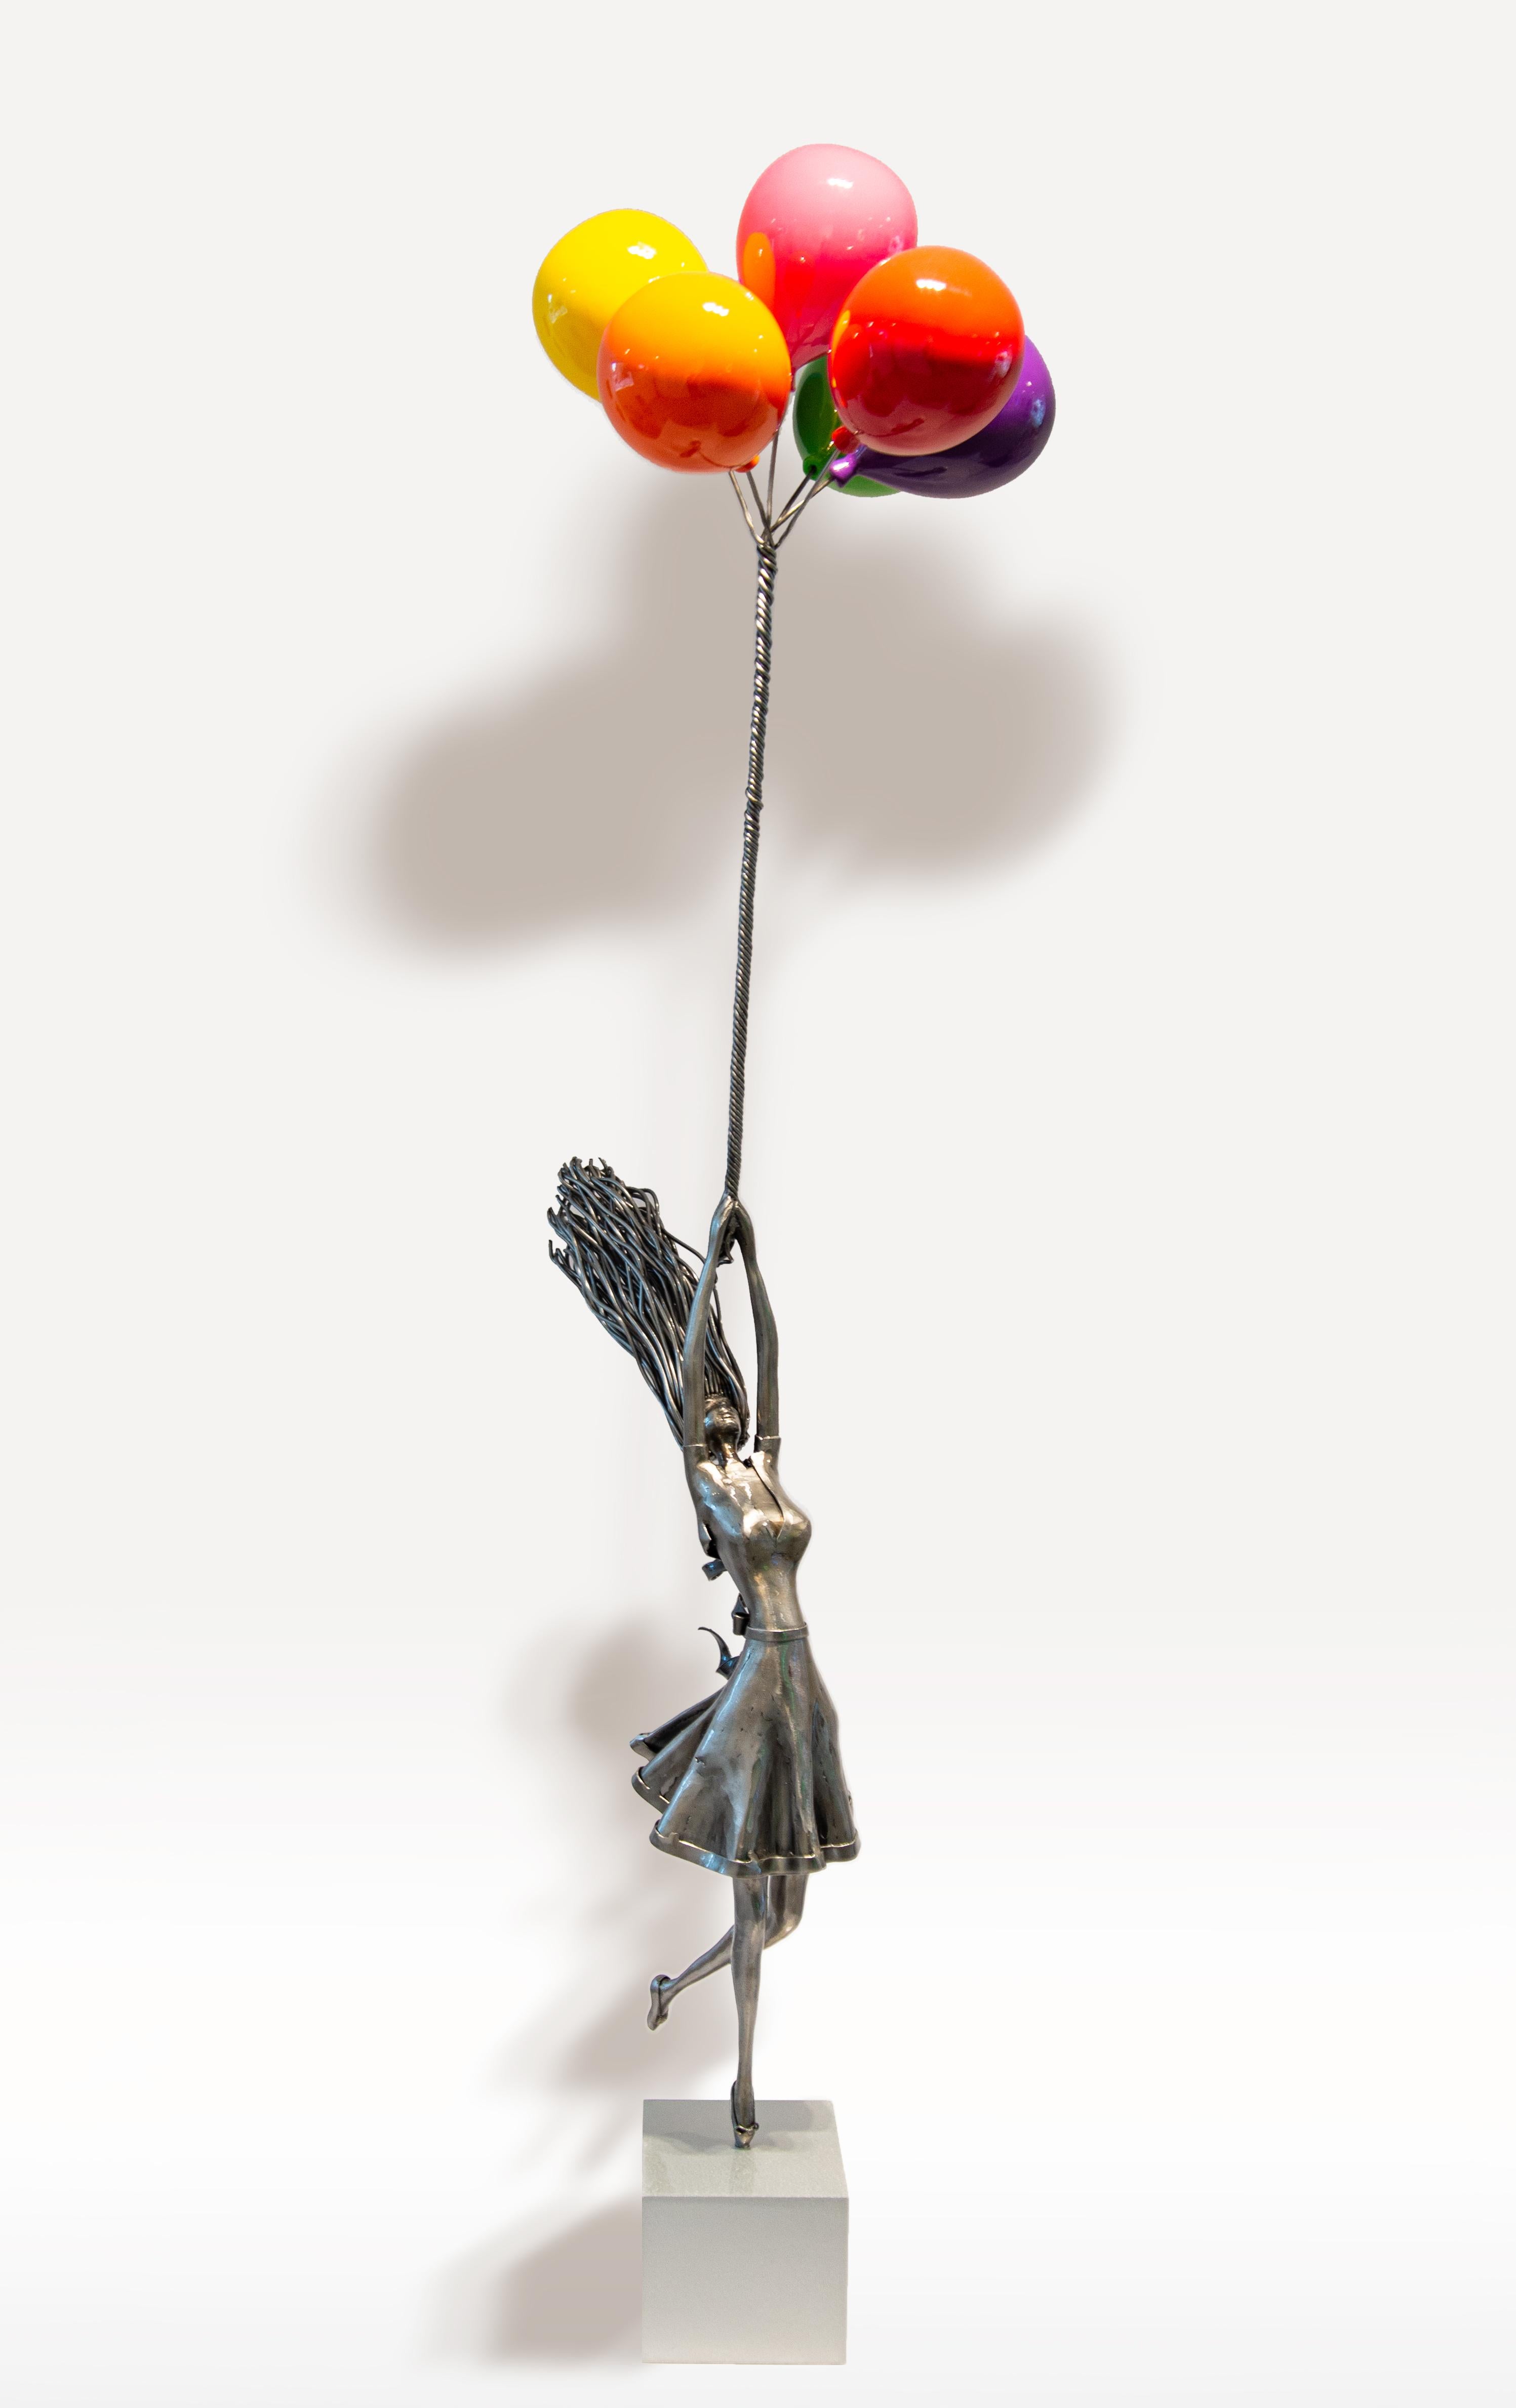 Soar Above - colorful, figurative, female, hand-hammered steel sculpture - Contemporary Mixed Media Art by Derya Ozparlak